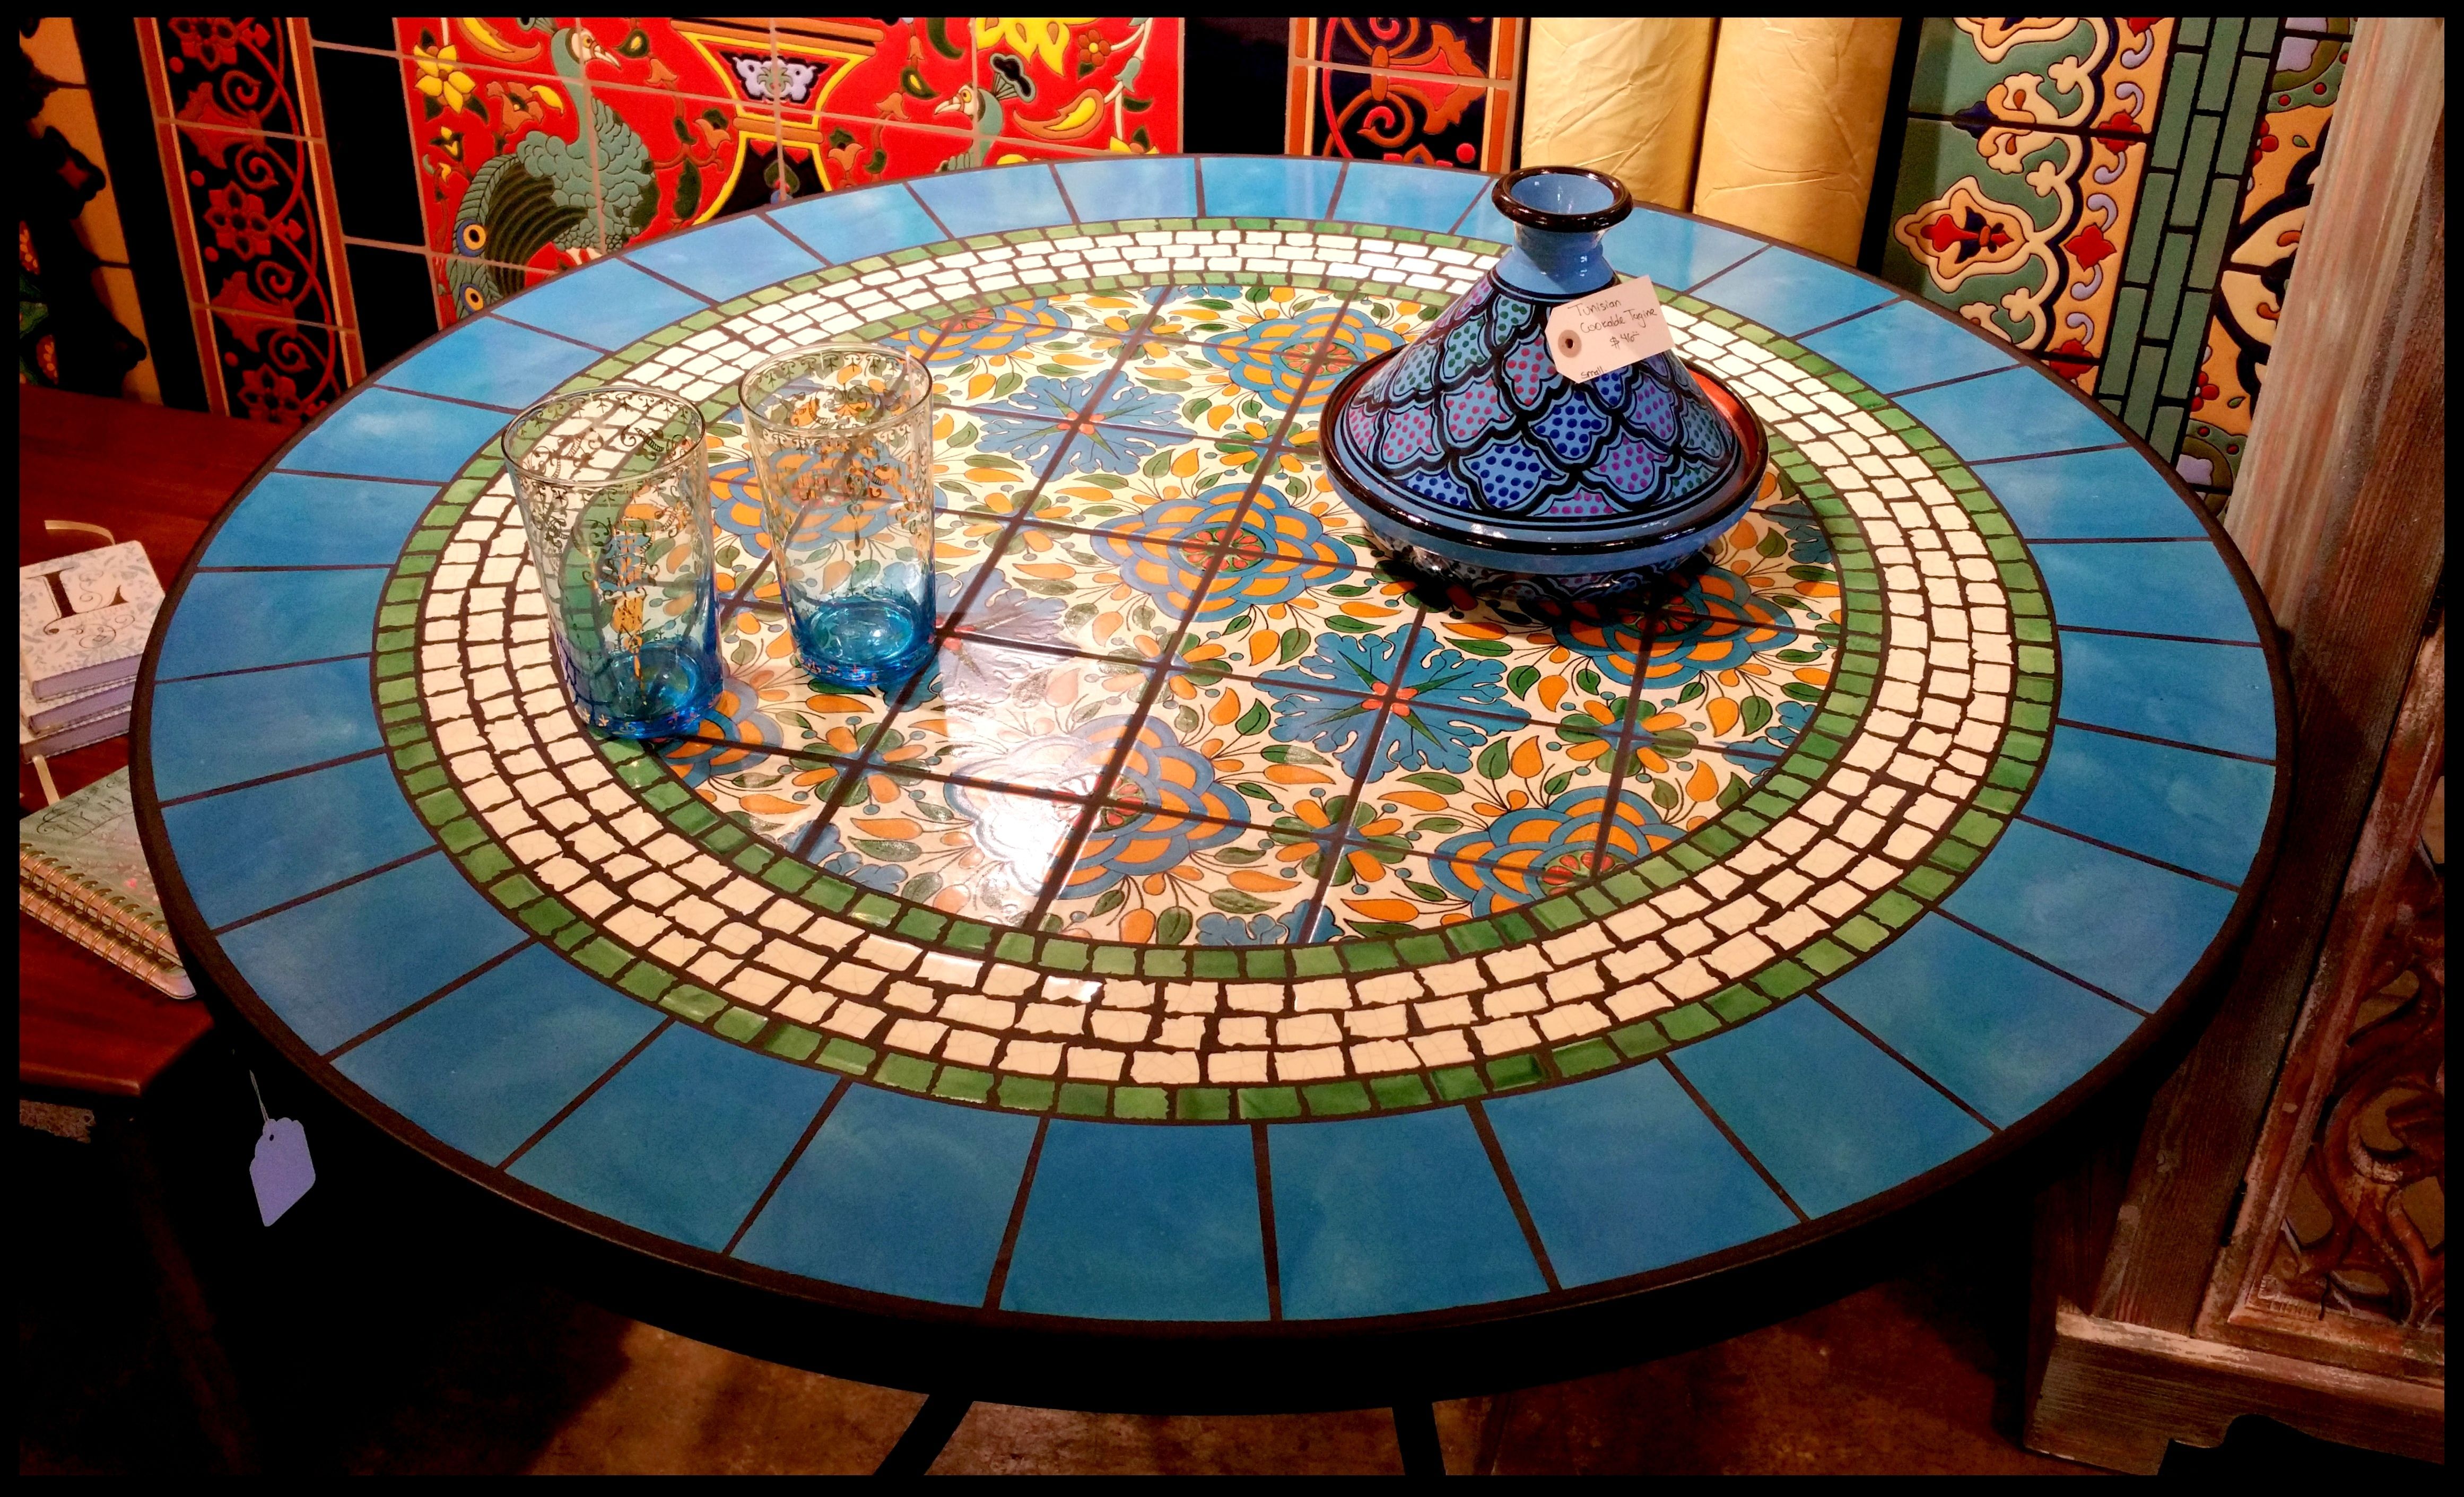 Awesome Mosaic Tables Ideas